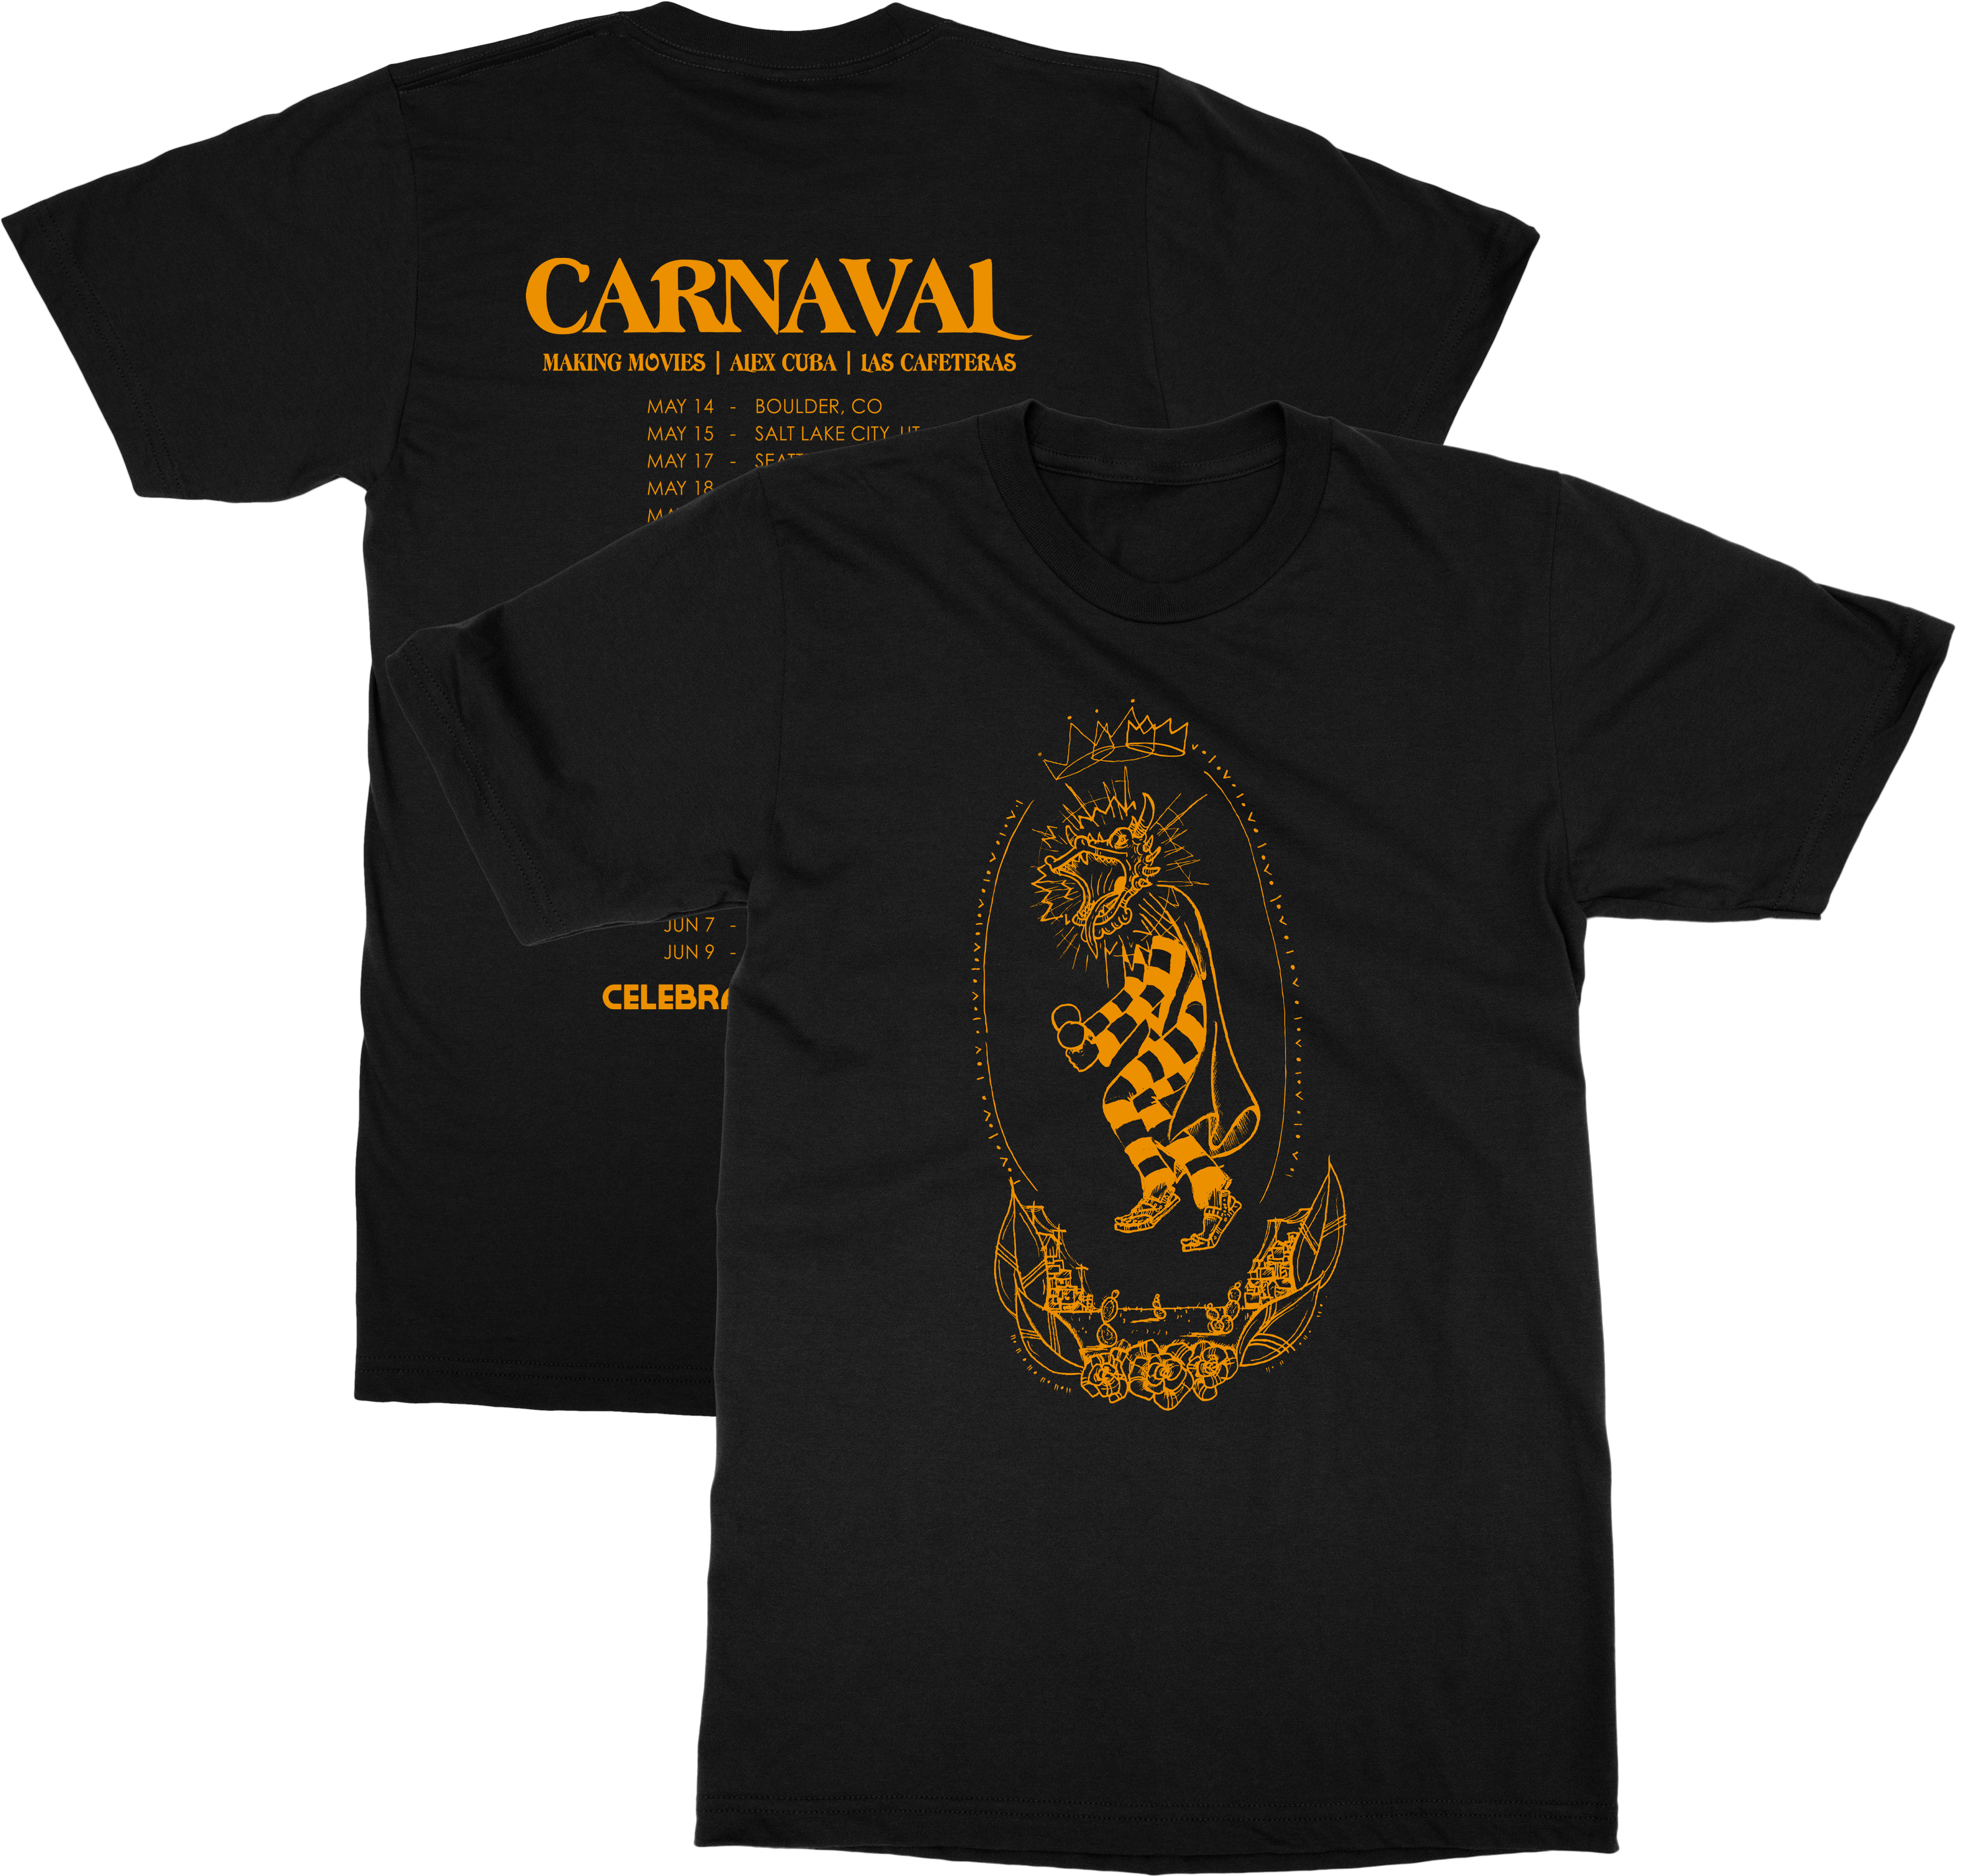 løber tør At hoppe Understrege Making Movies | Carnaval T-Shirt – Merch Central